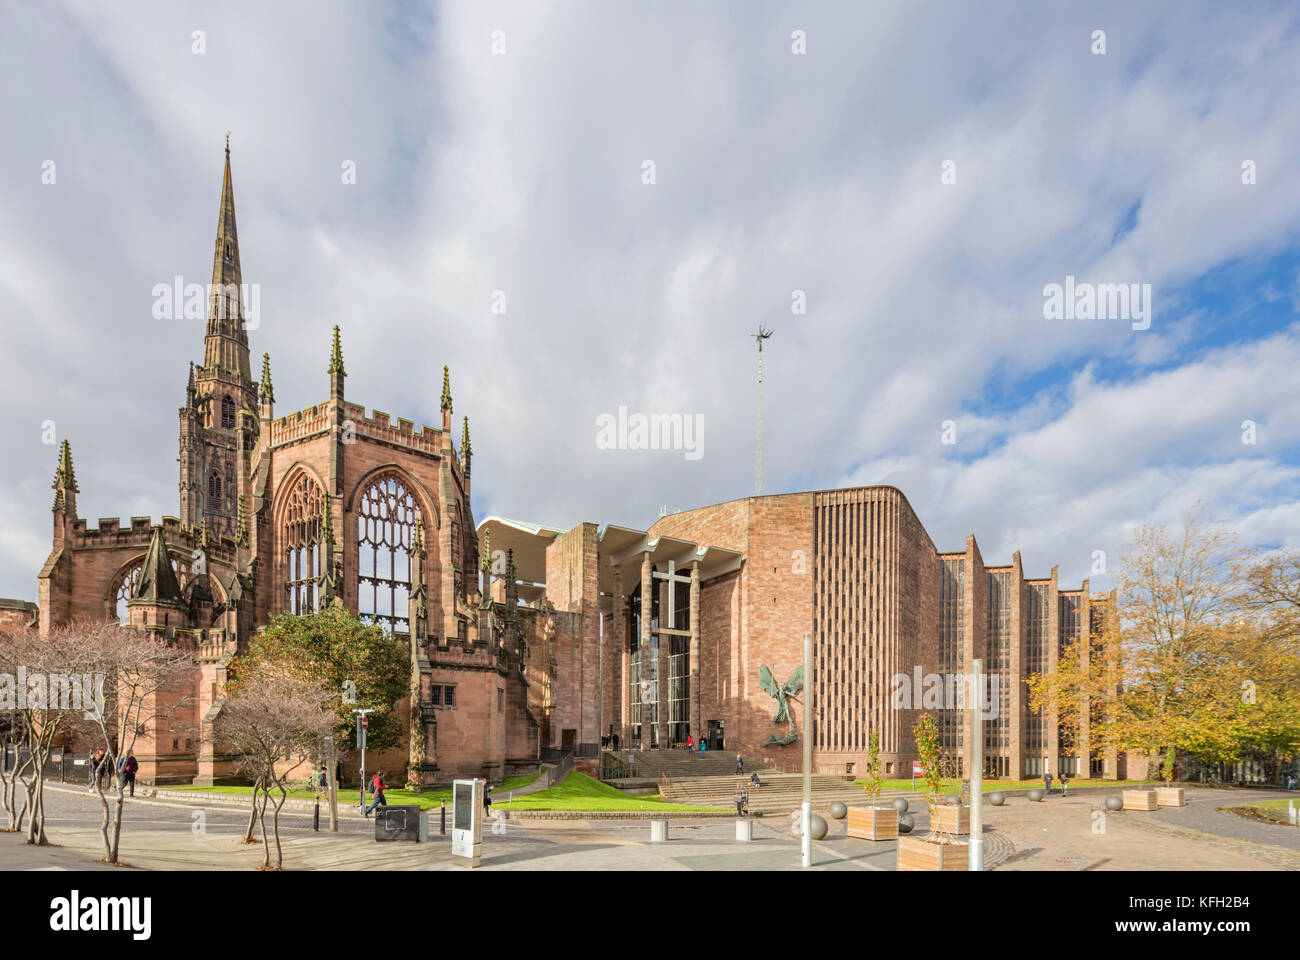 The old and new Coventry Cathedrals, Coventry, England, UK Stock Photo